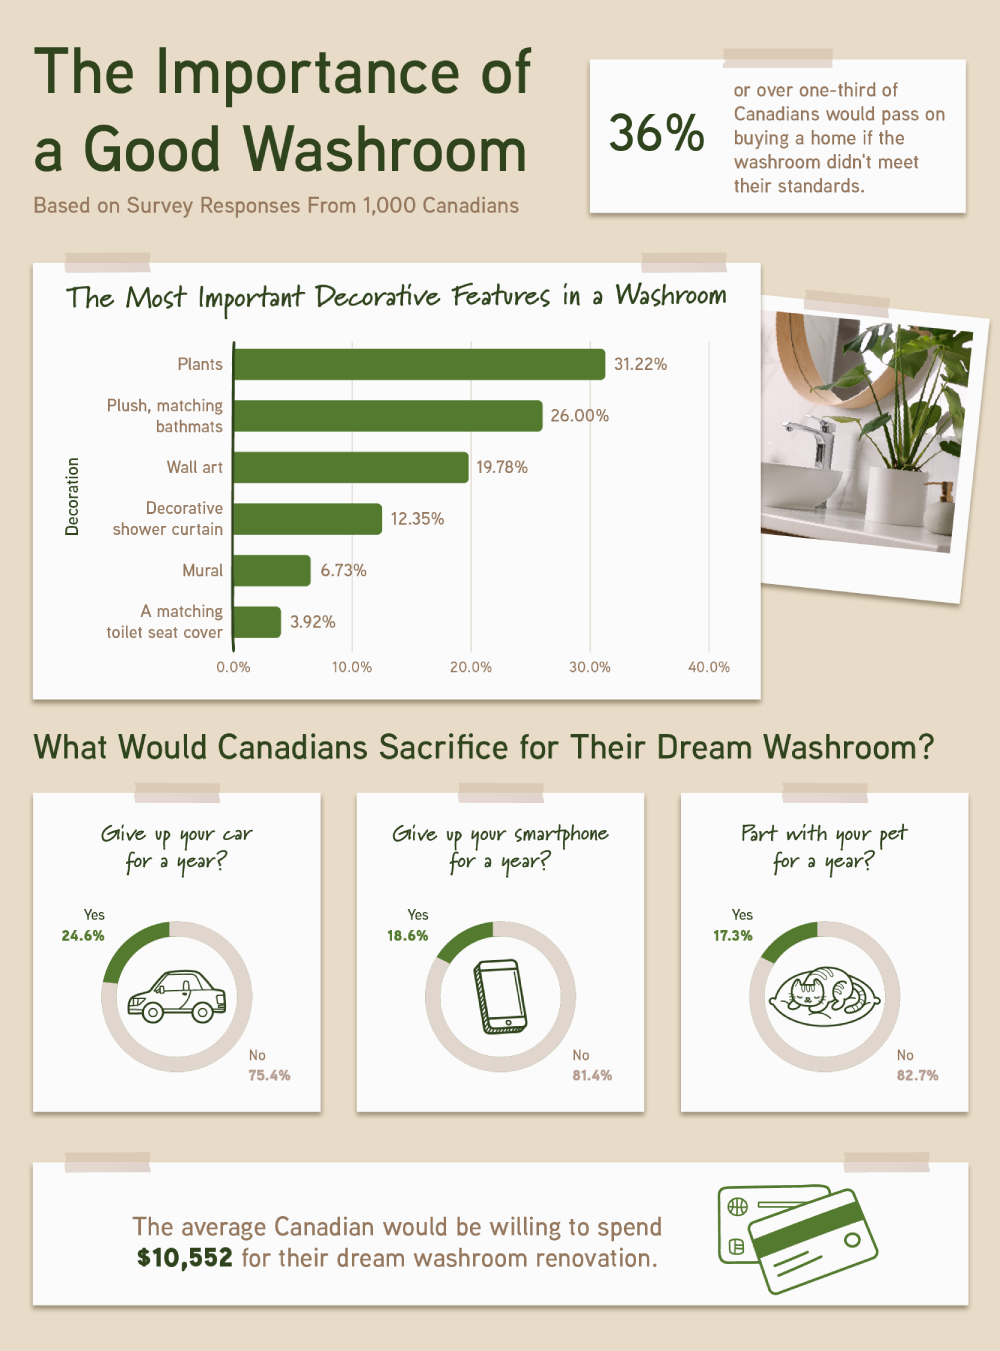 A graphic showing insights from a survey about the importance of a good washroom